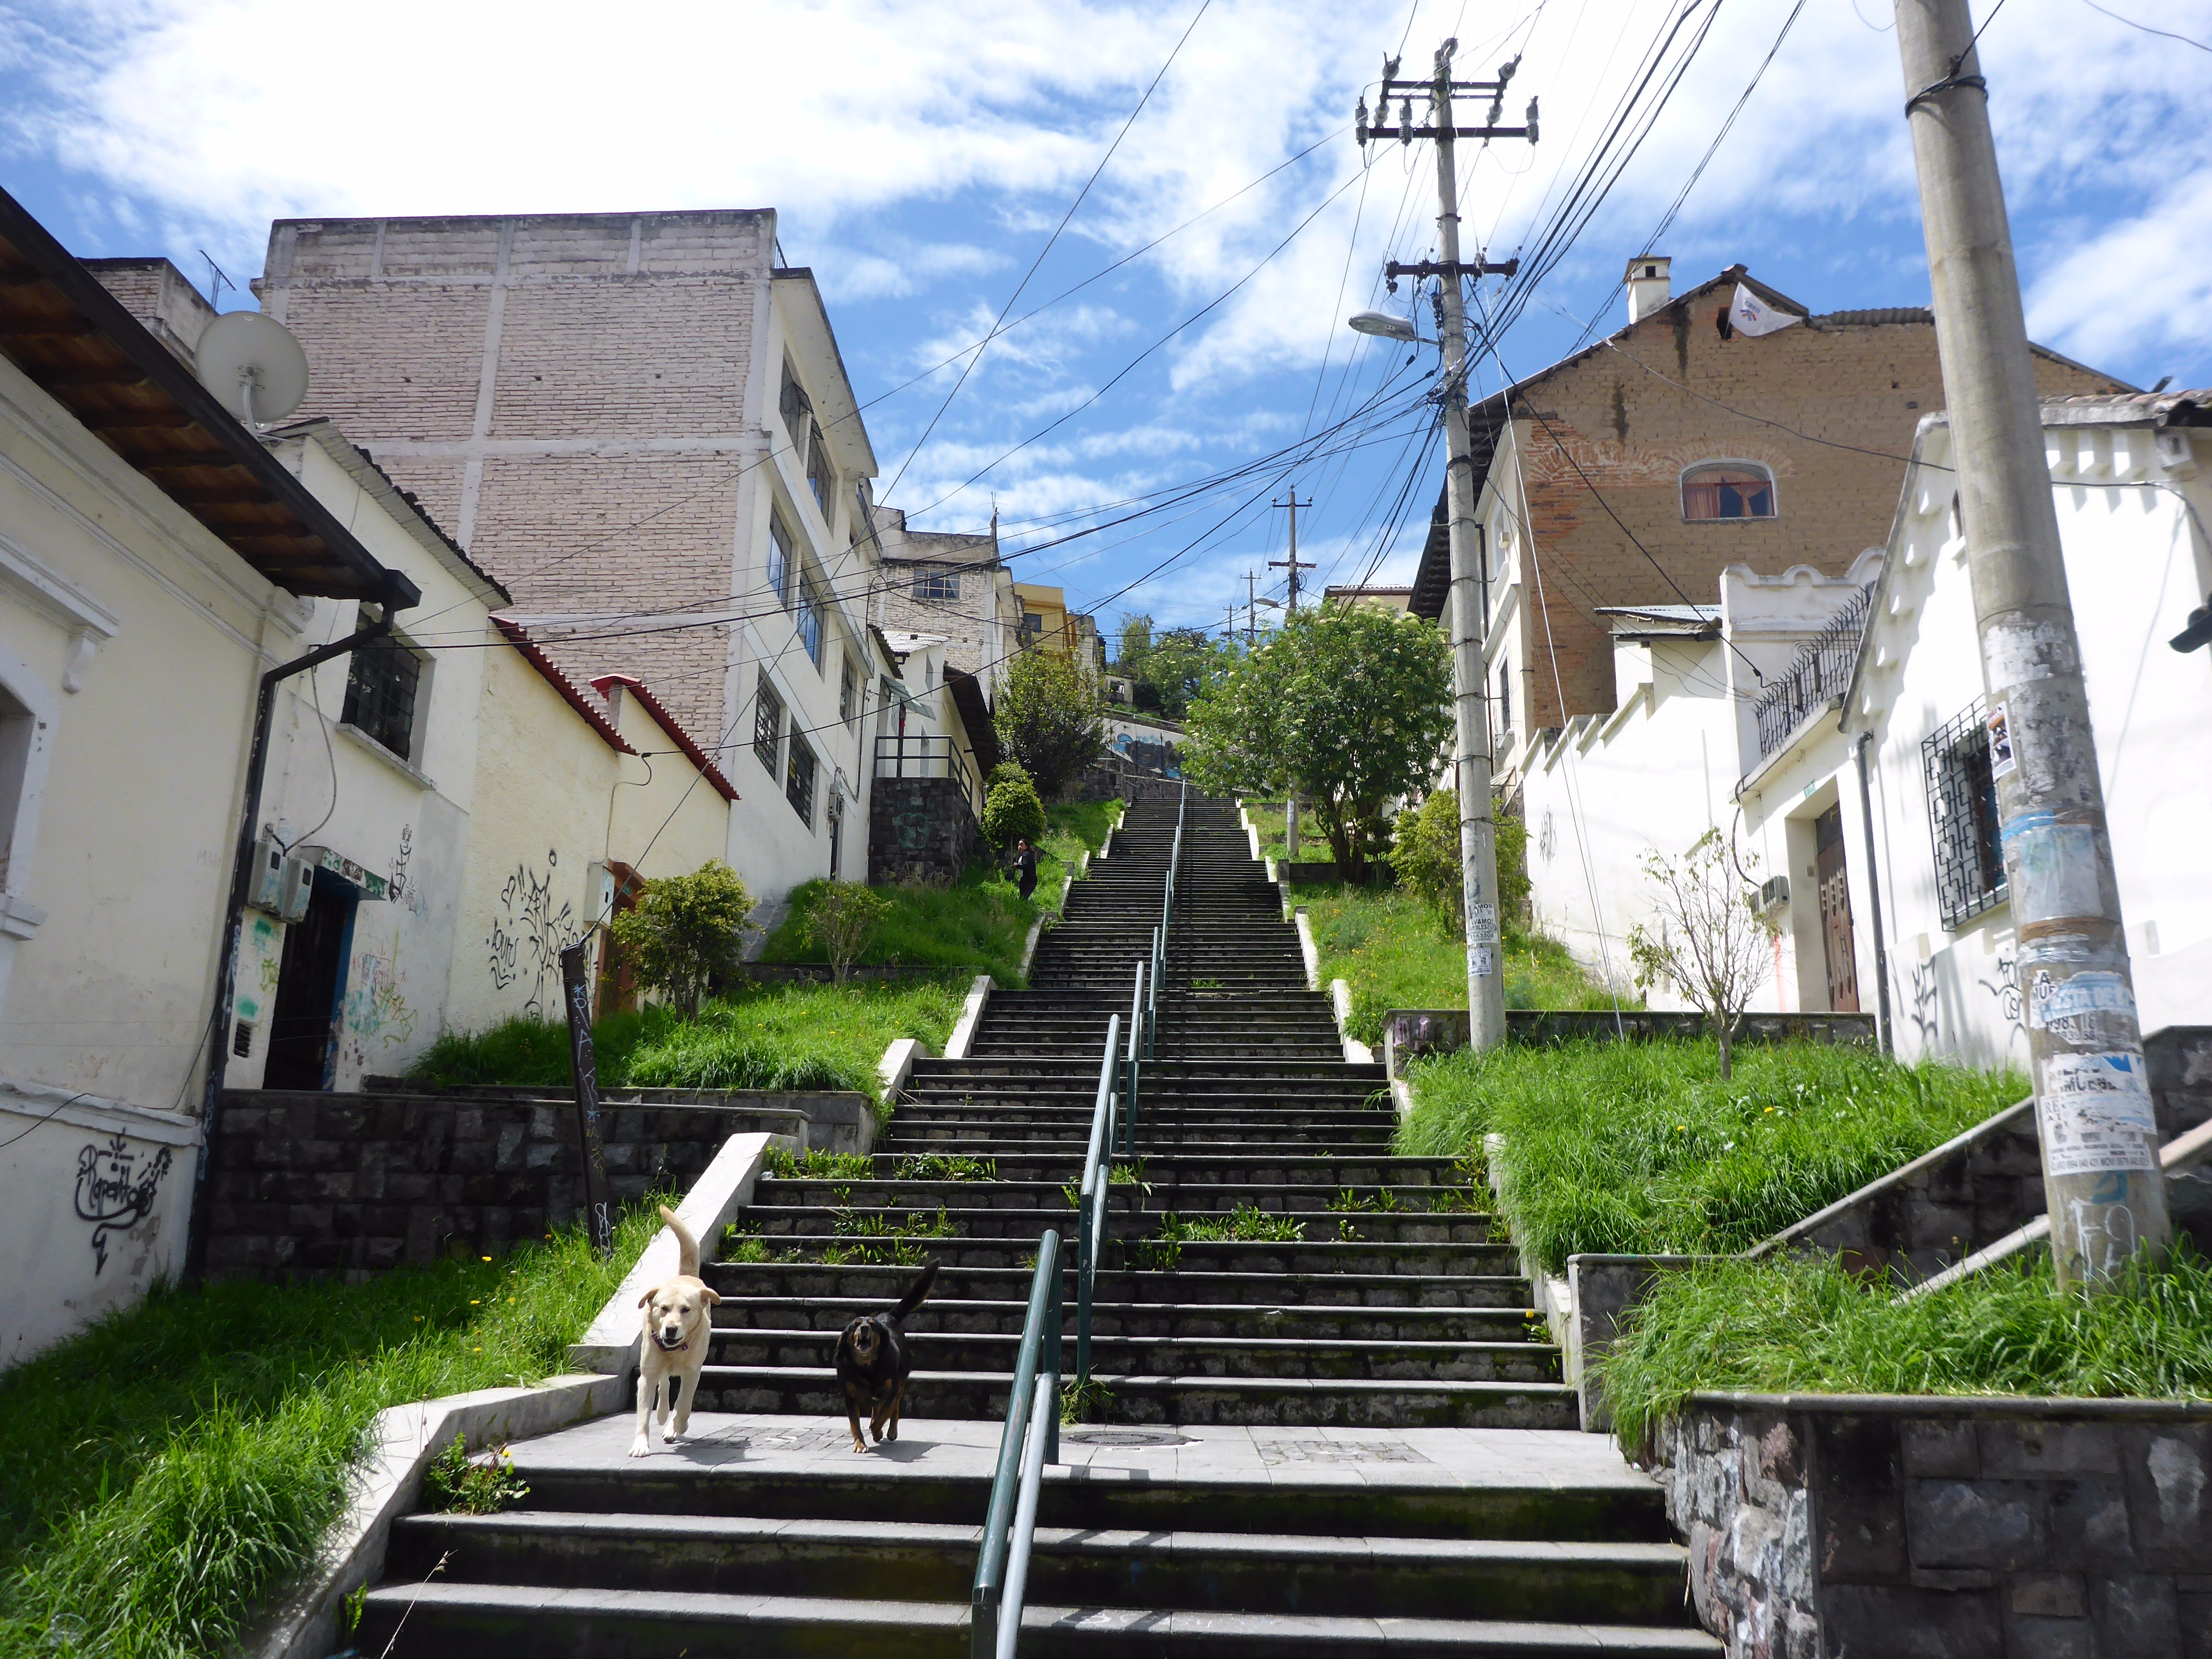 The many steep hills of Quito prove a hiking challenge in the thin atmosphere.